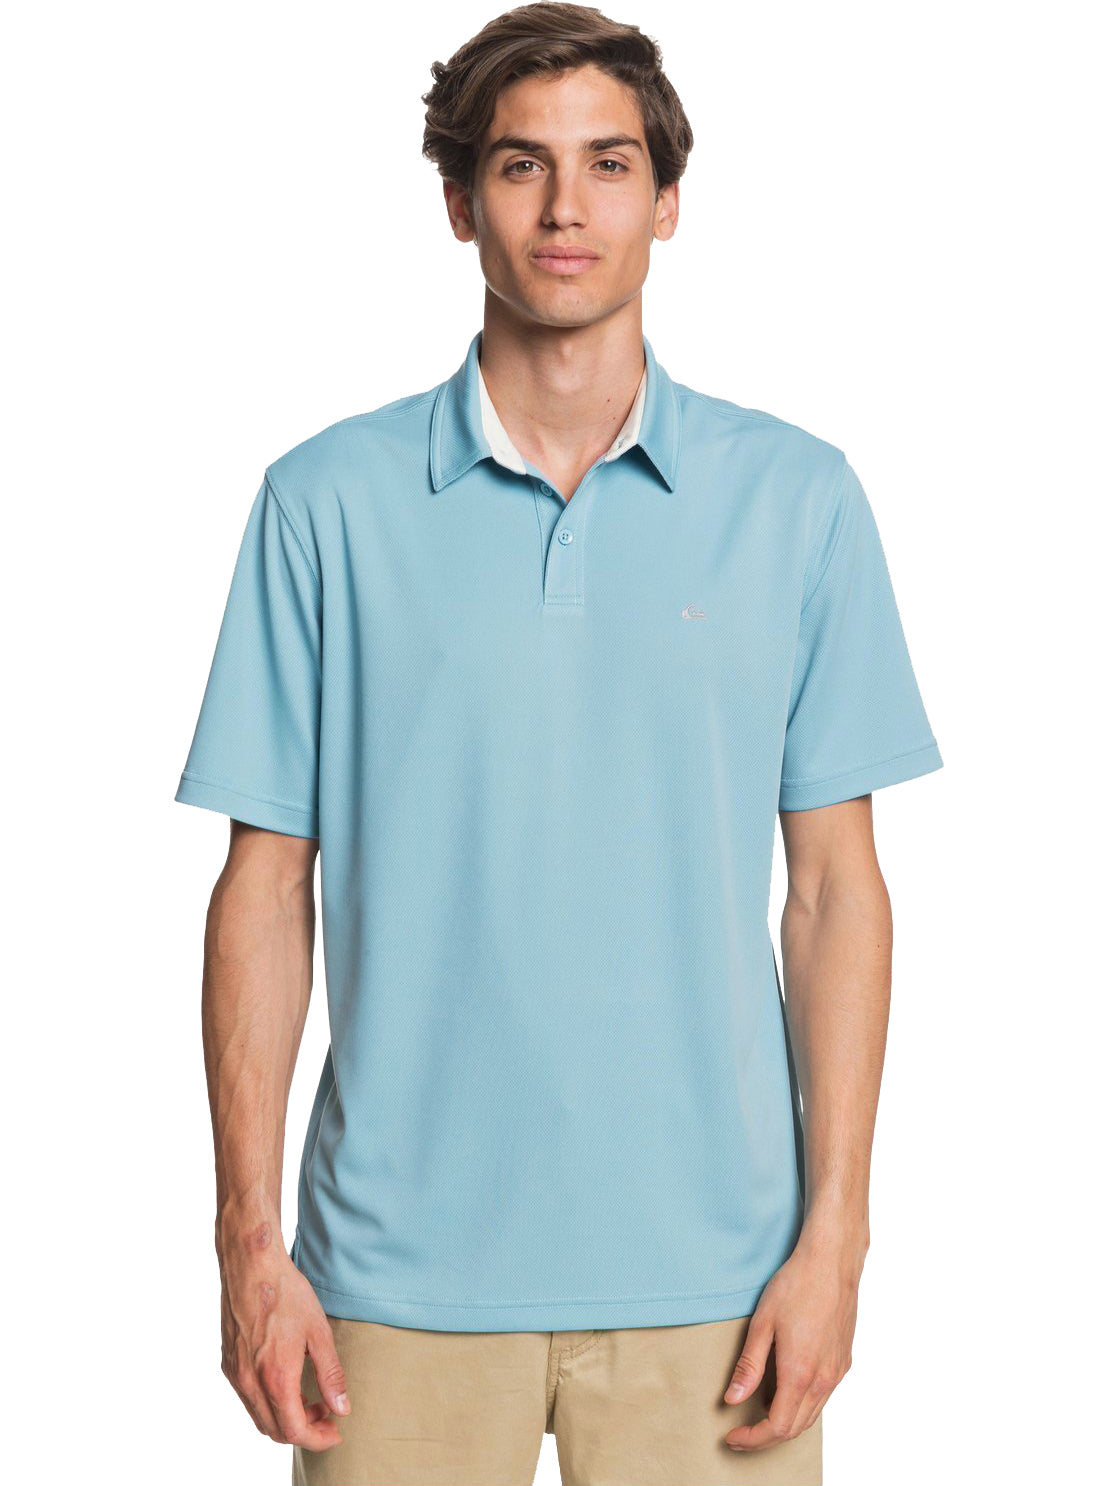 Quiksilver Waterman Water 2 Polo BHW0 M